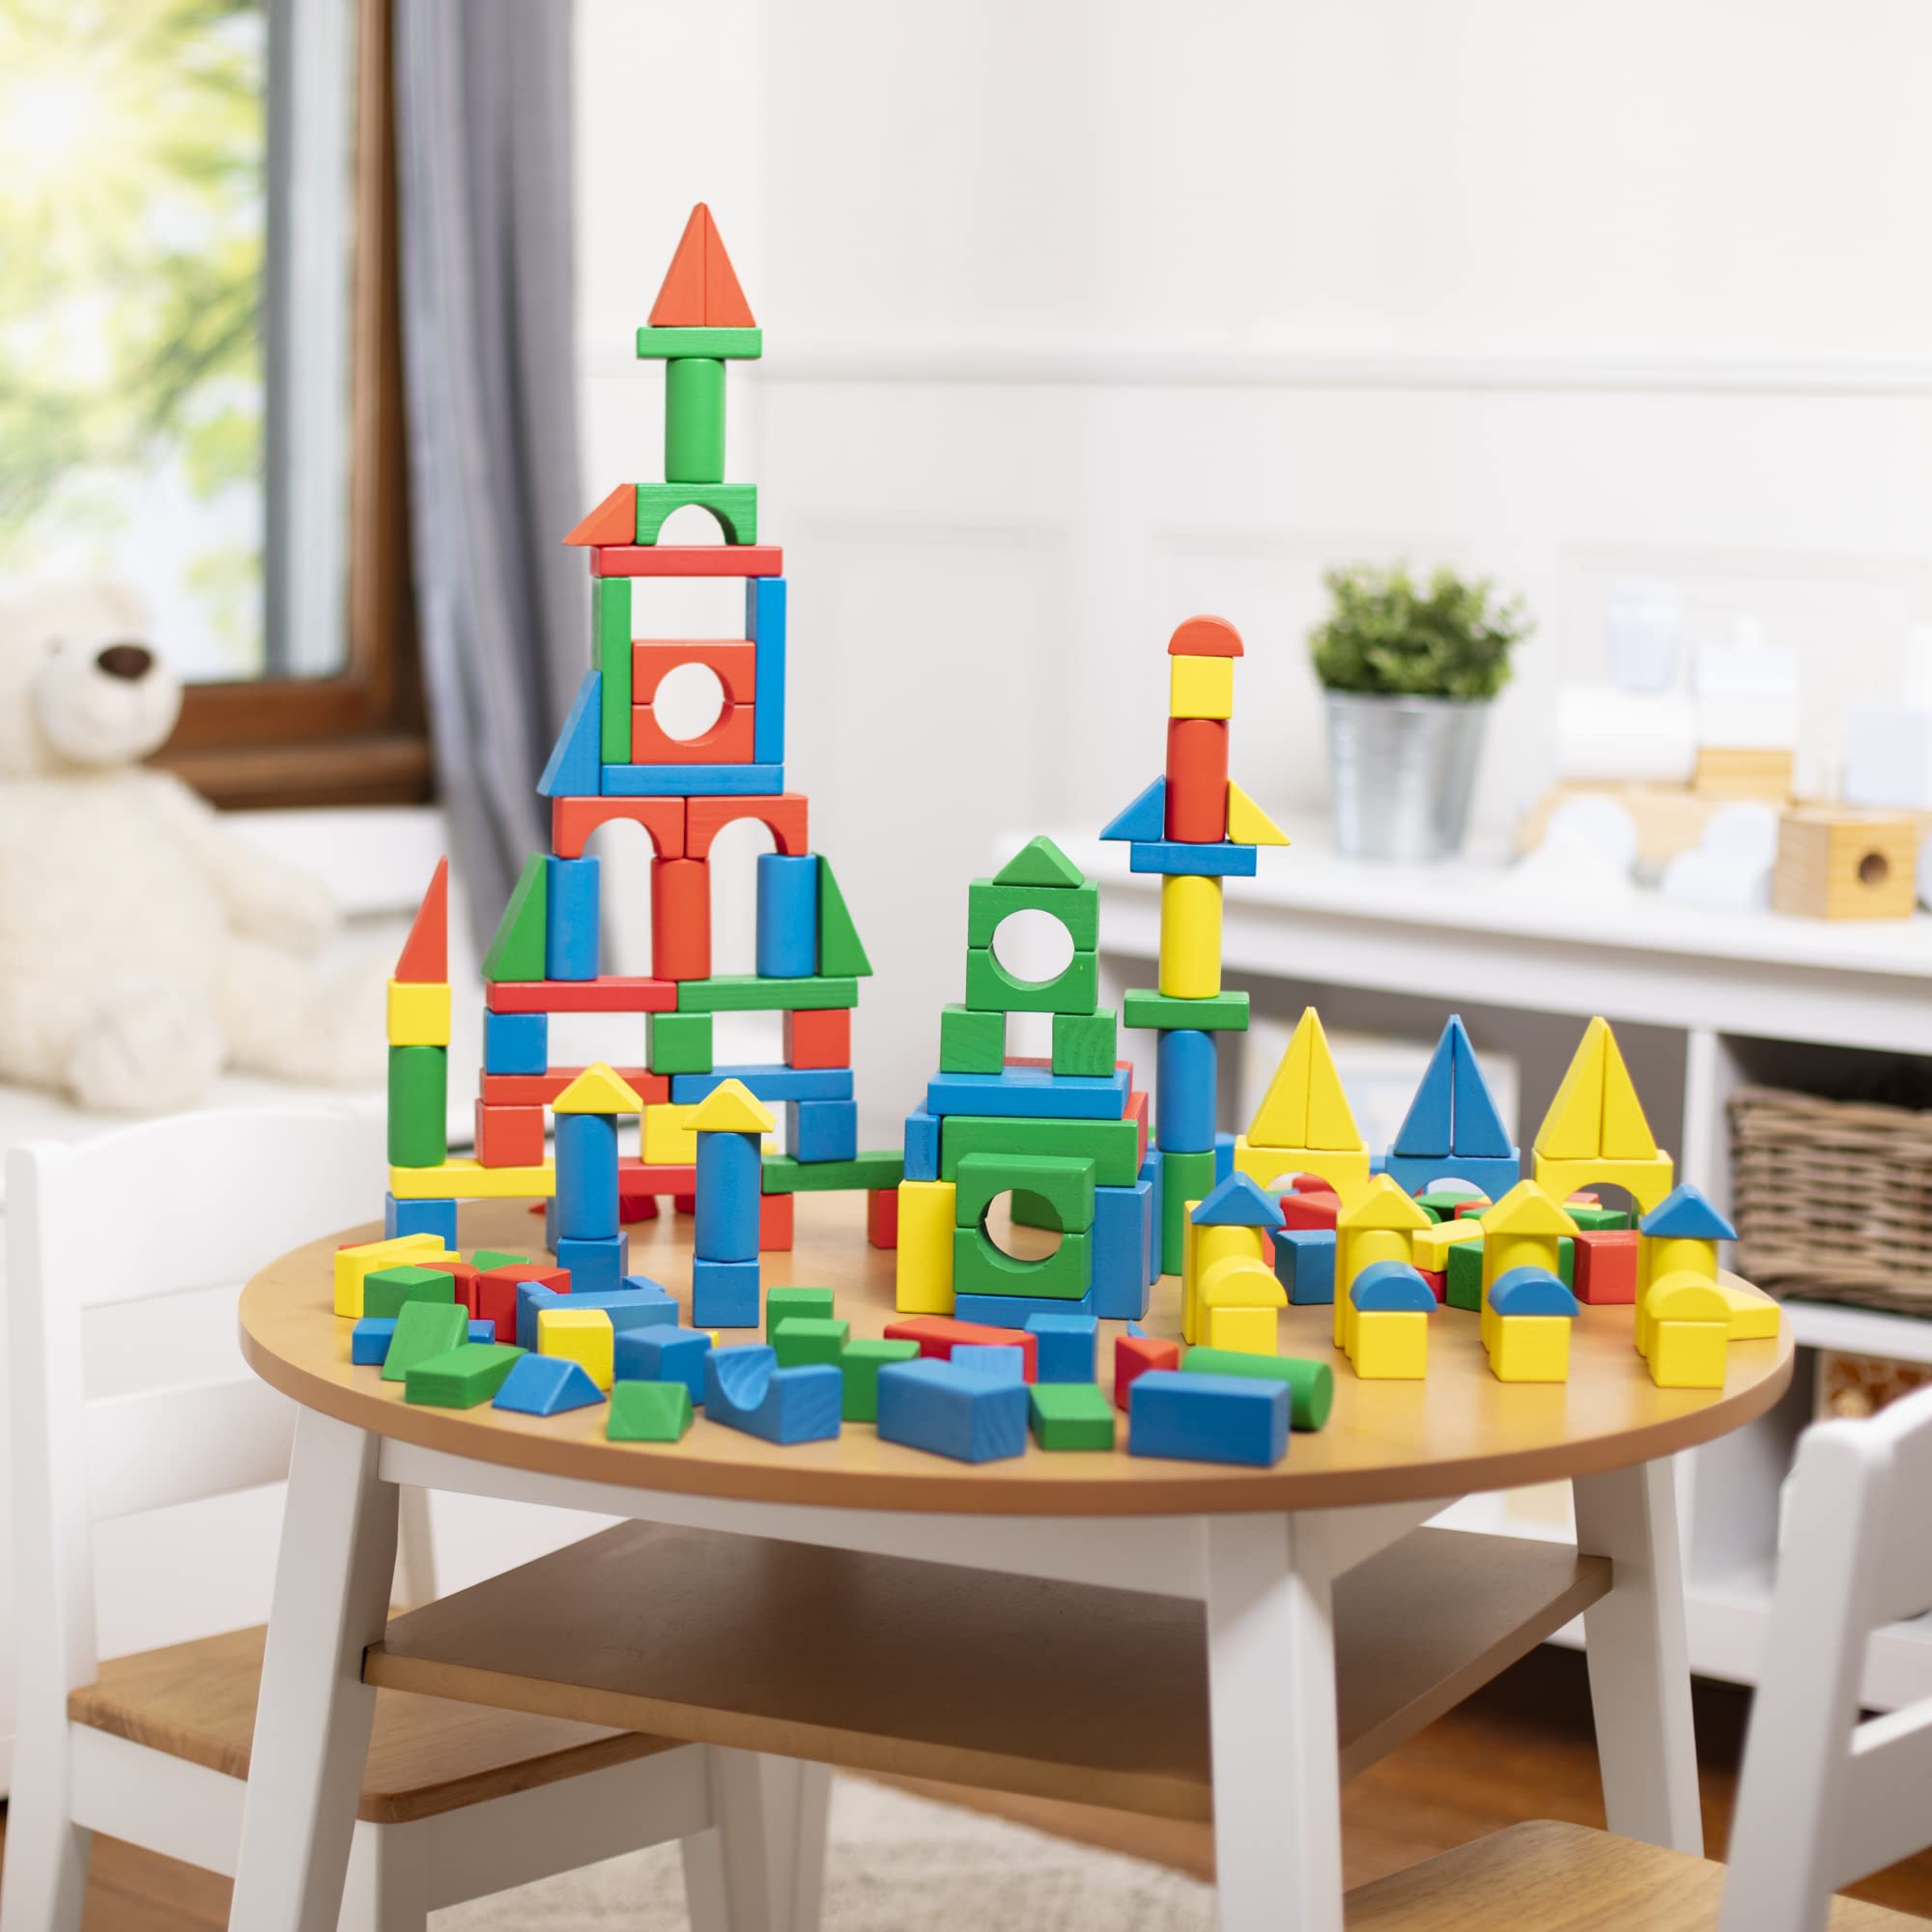 Melissa & Doug Wooden Building Block Set - 200 Blocks in 4 Colors and 9 Shapes